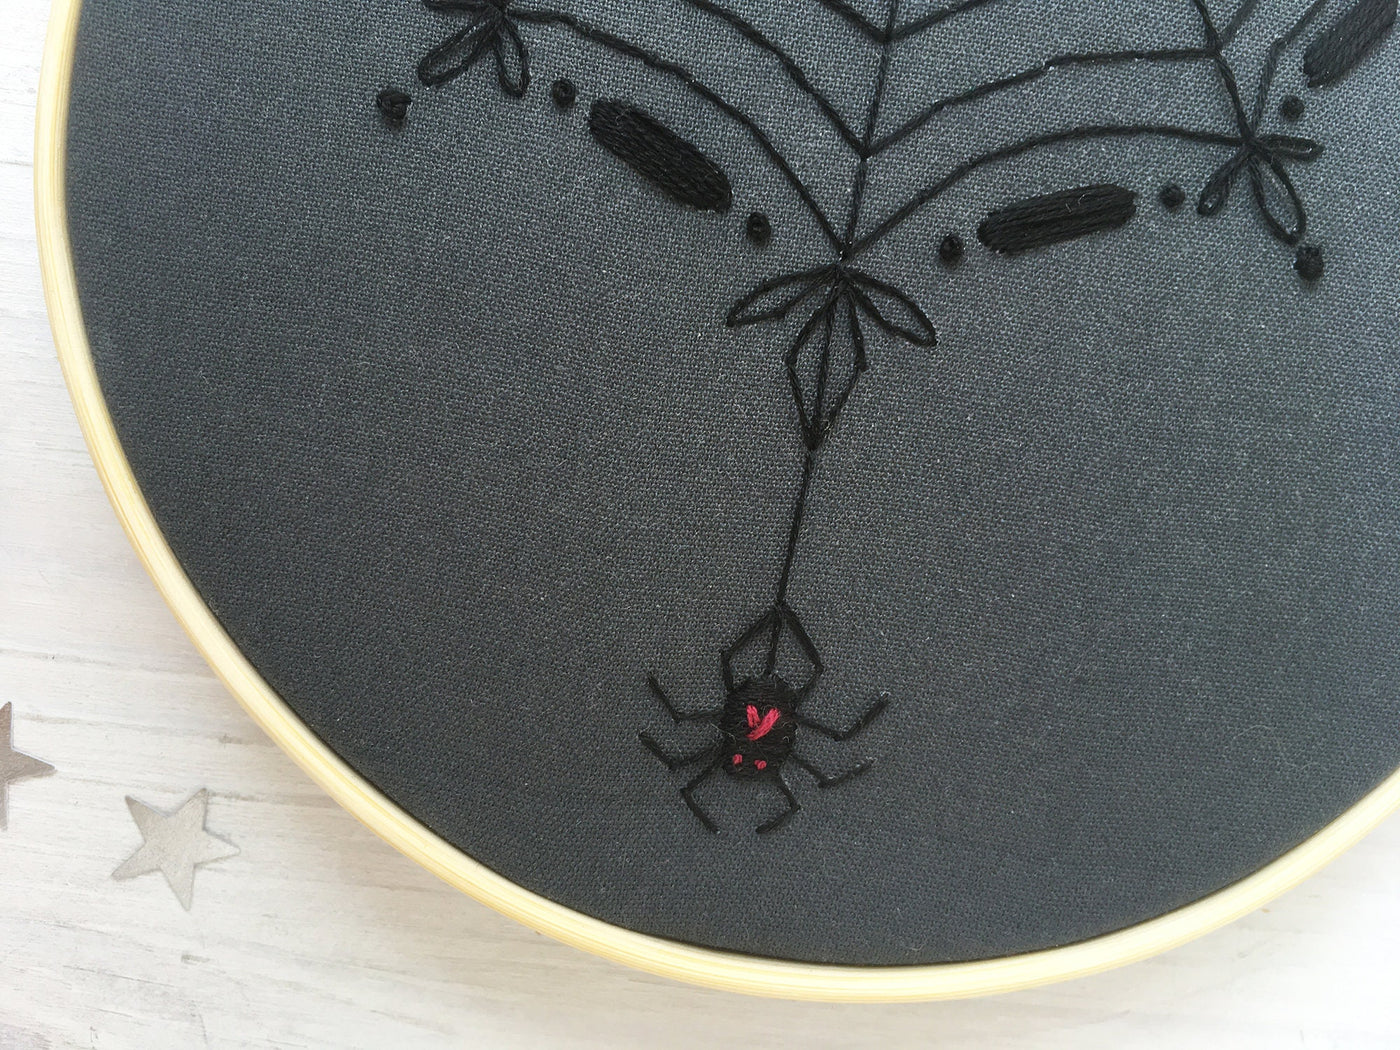 Black Spider Web Hand Embroidery pattern download